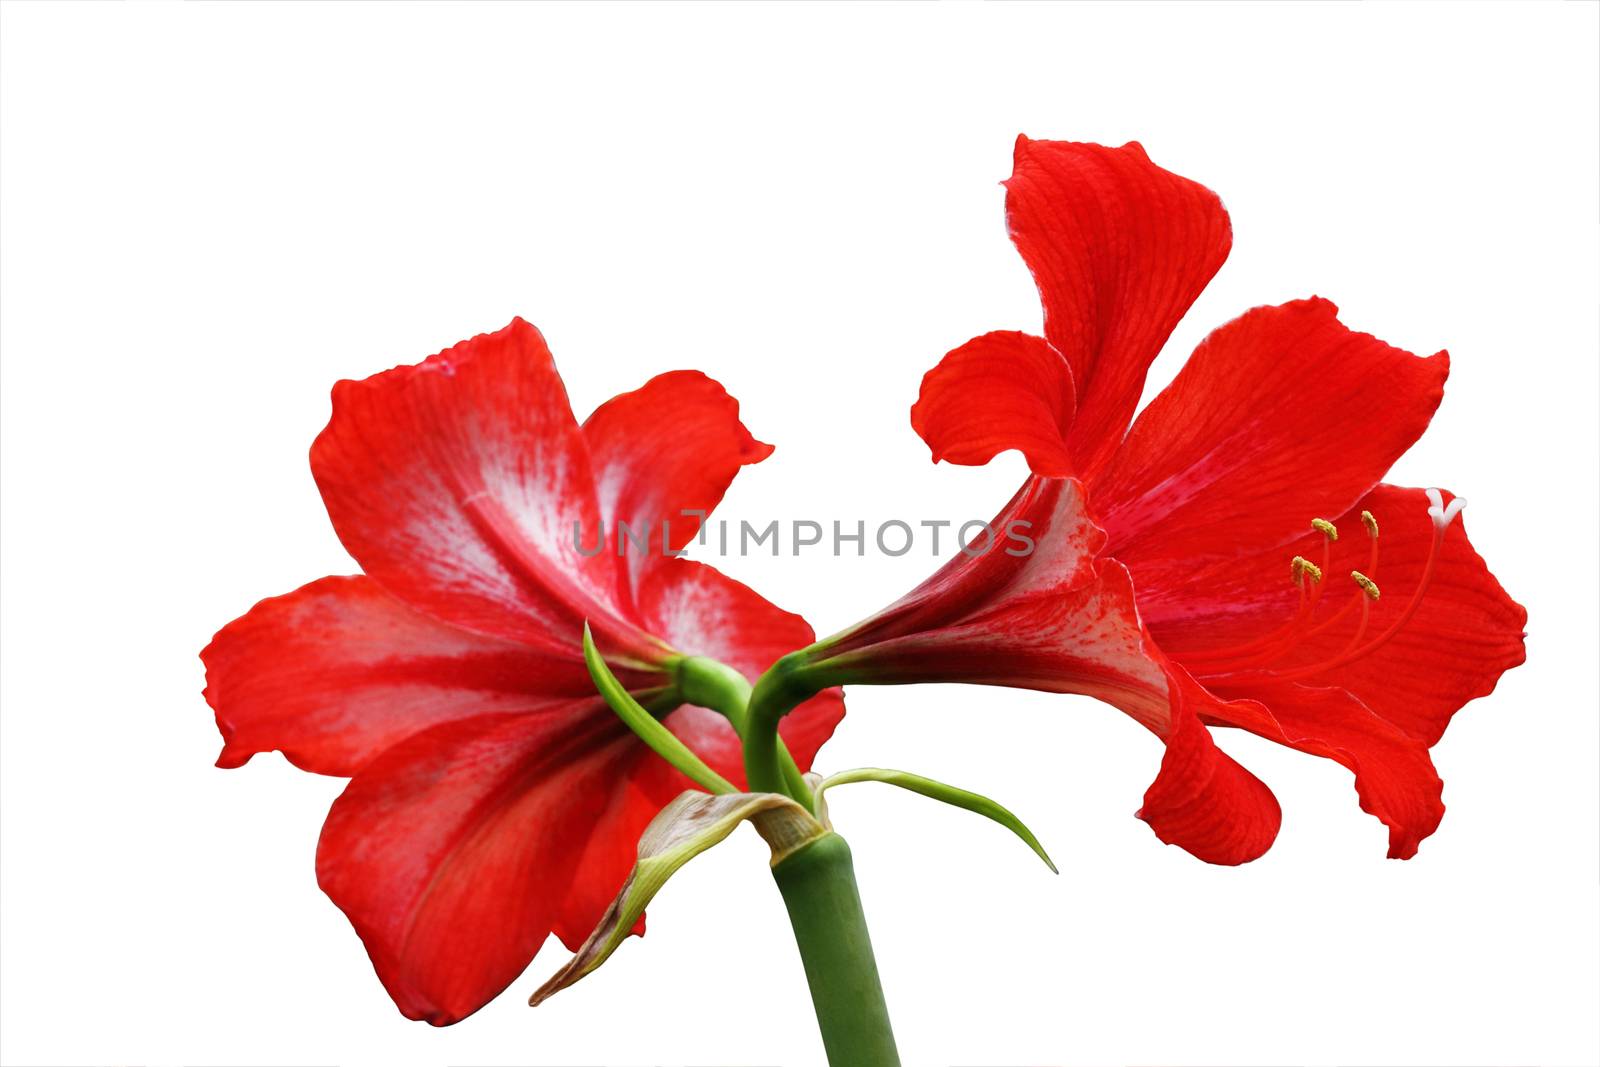 A photo of Red Amaryllis Hippeastrum flower isolated on white background, clipping path.